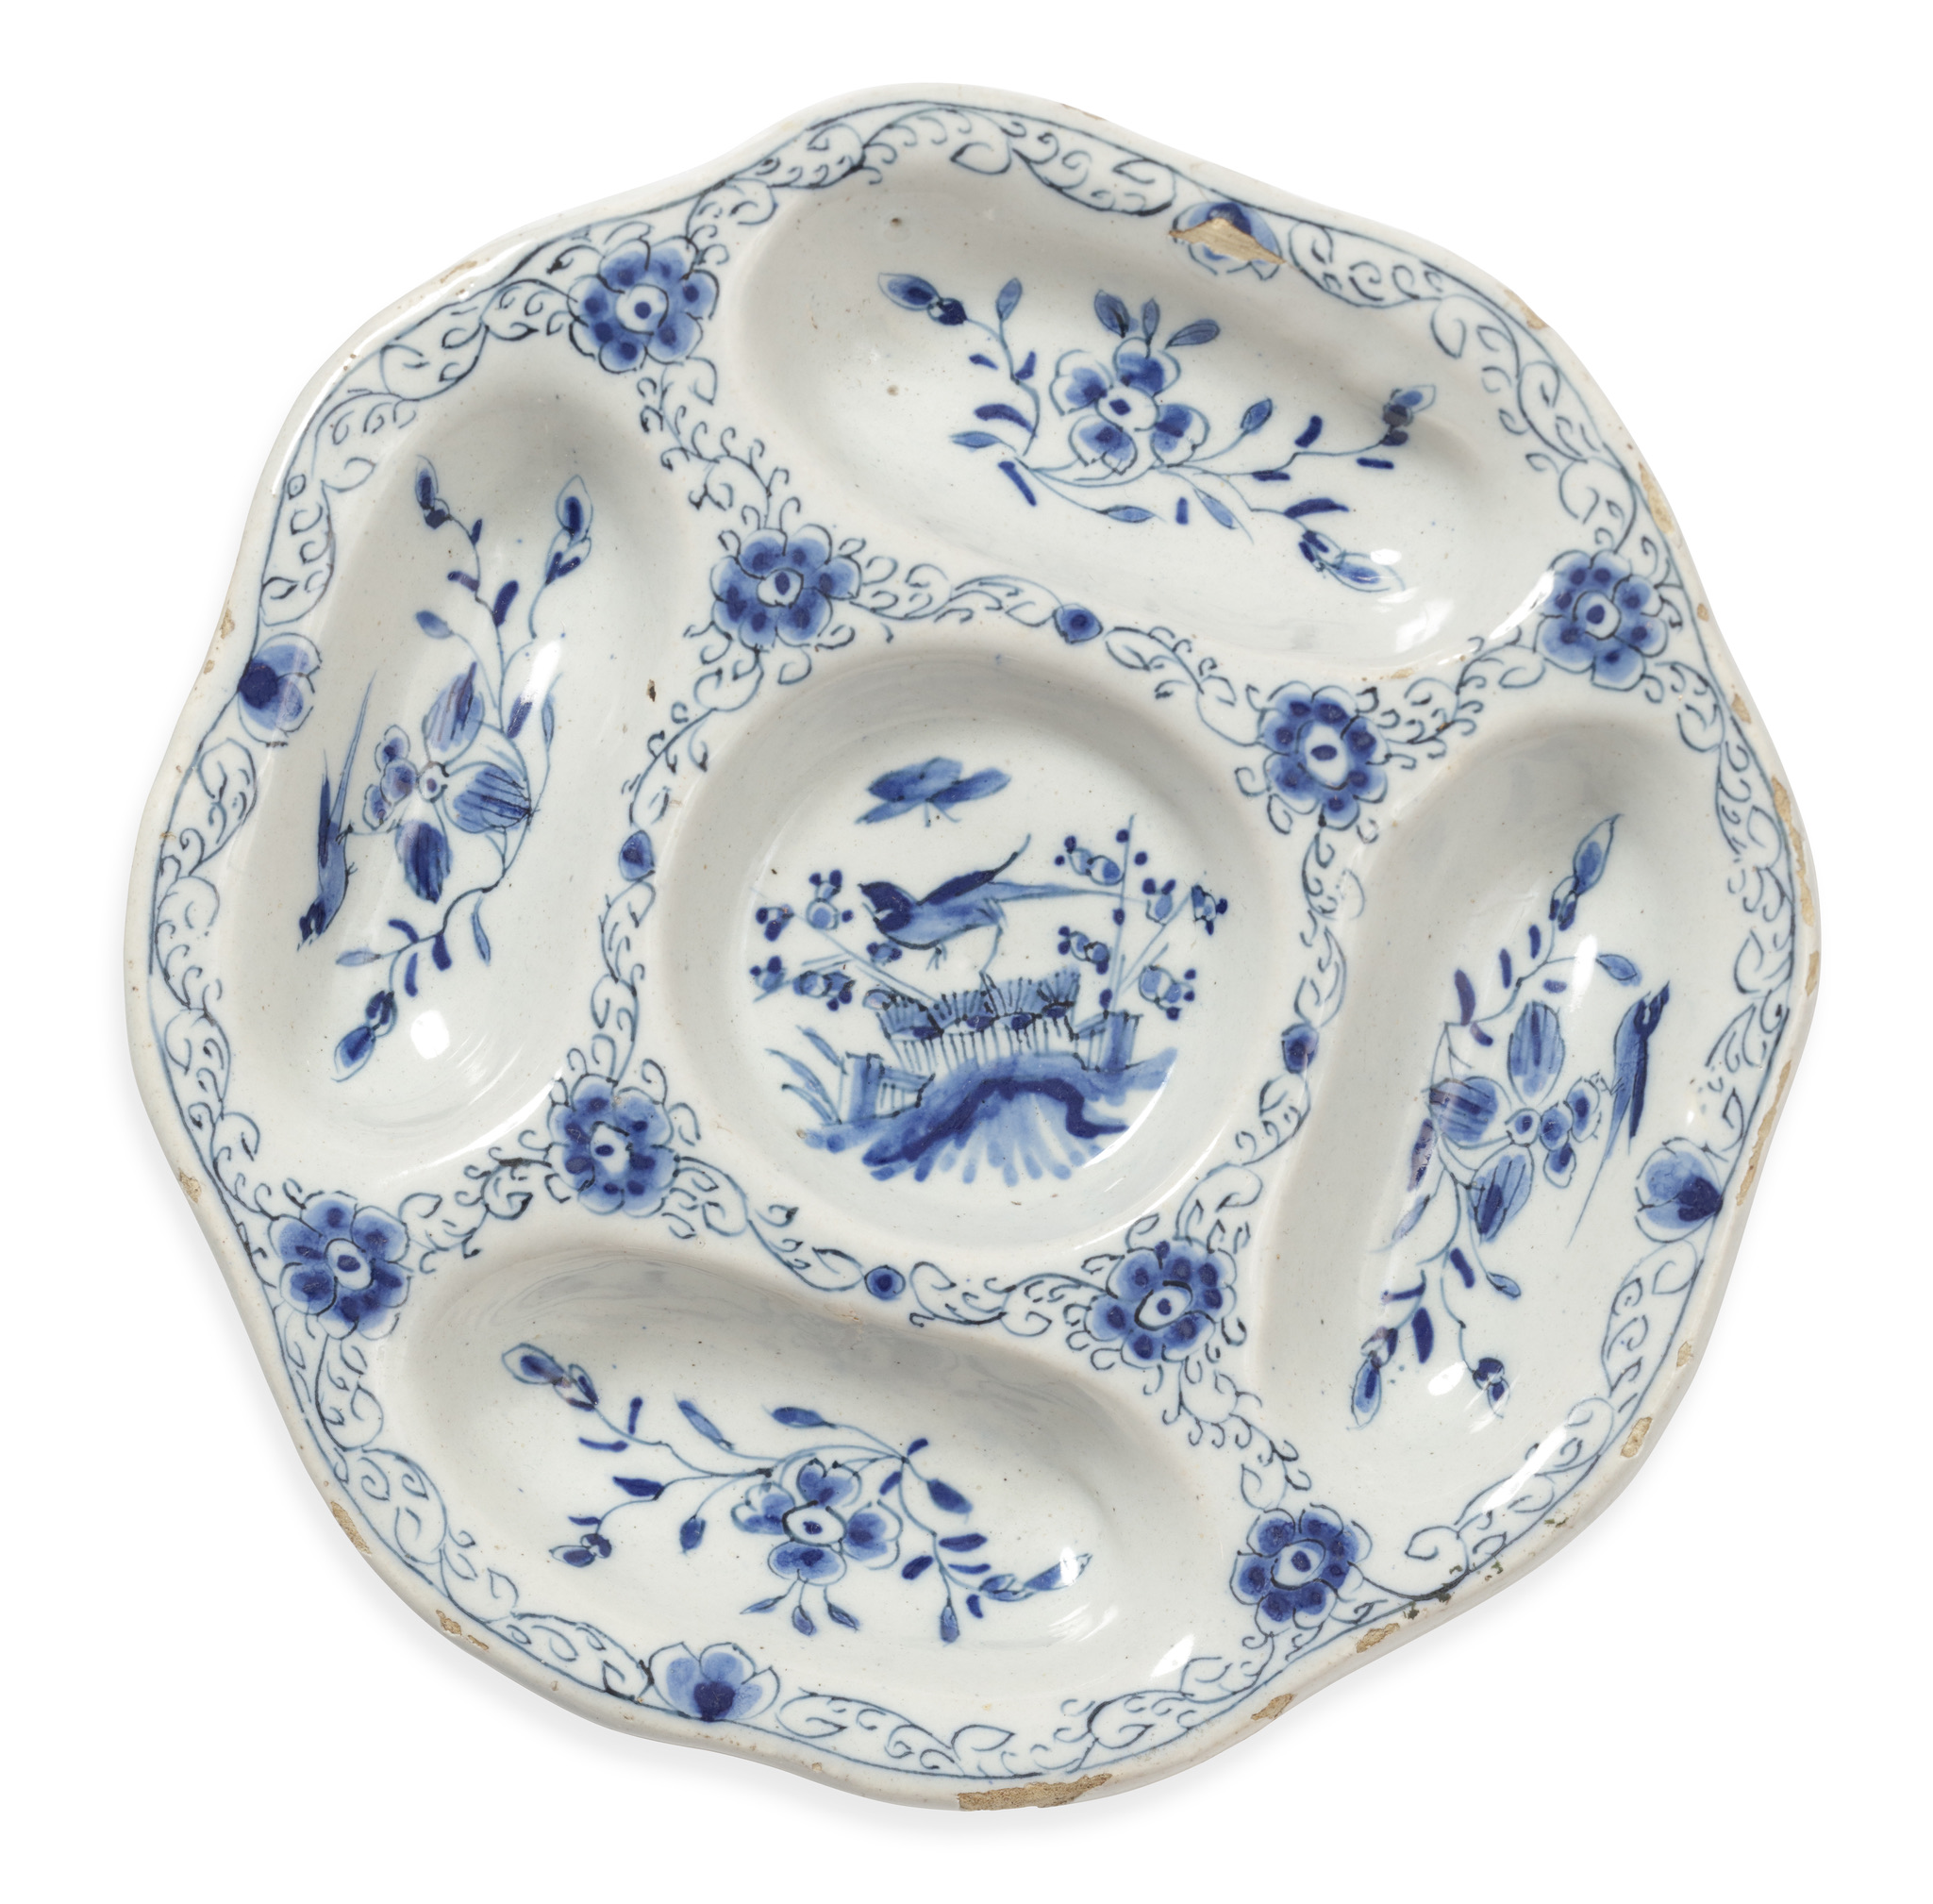 D2344. Blue and White Compartmented Sweetmeat Dish